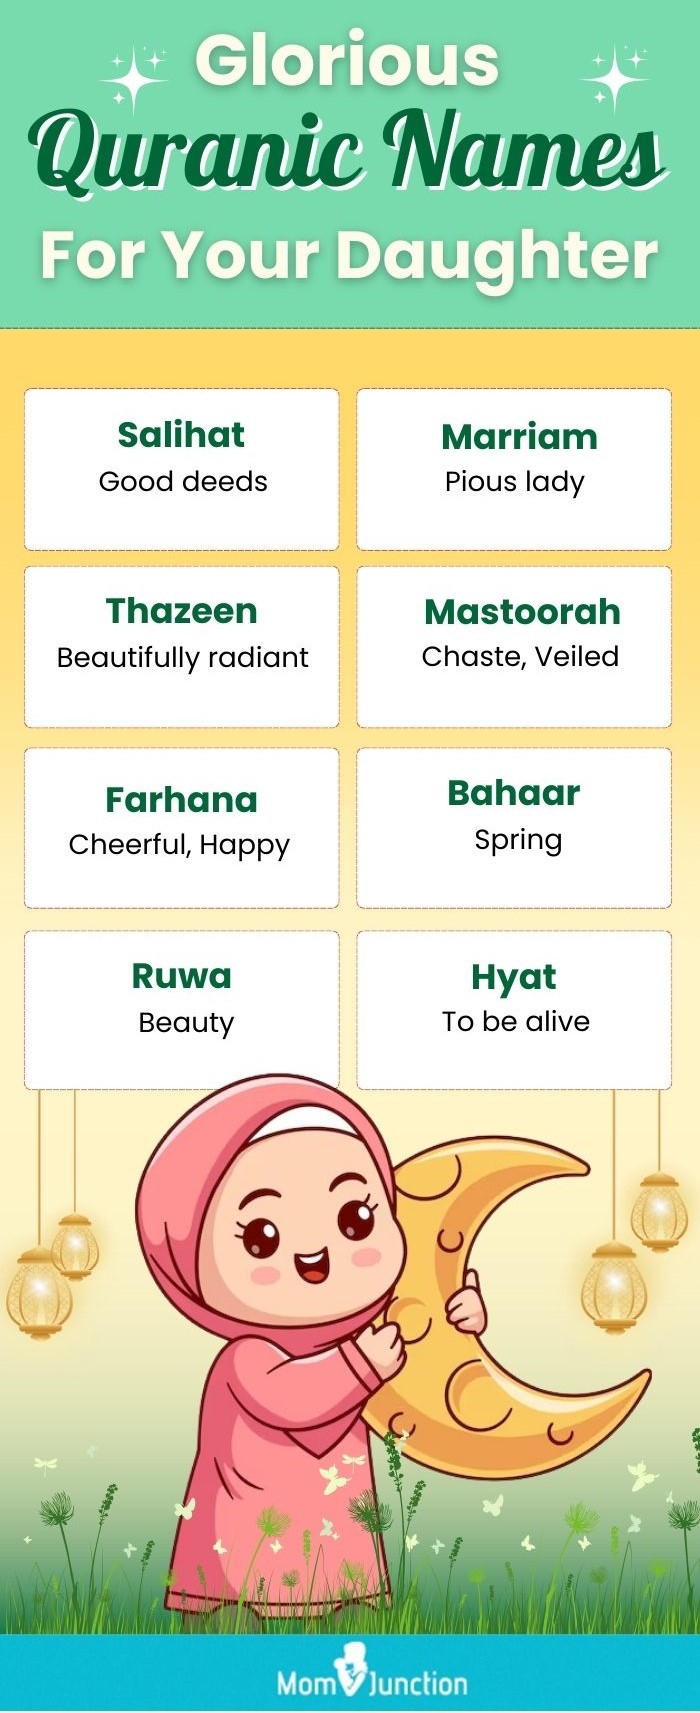 glorious quranic names for your daughter (infographic)